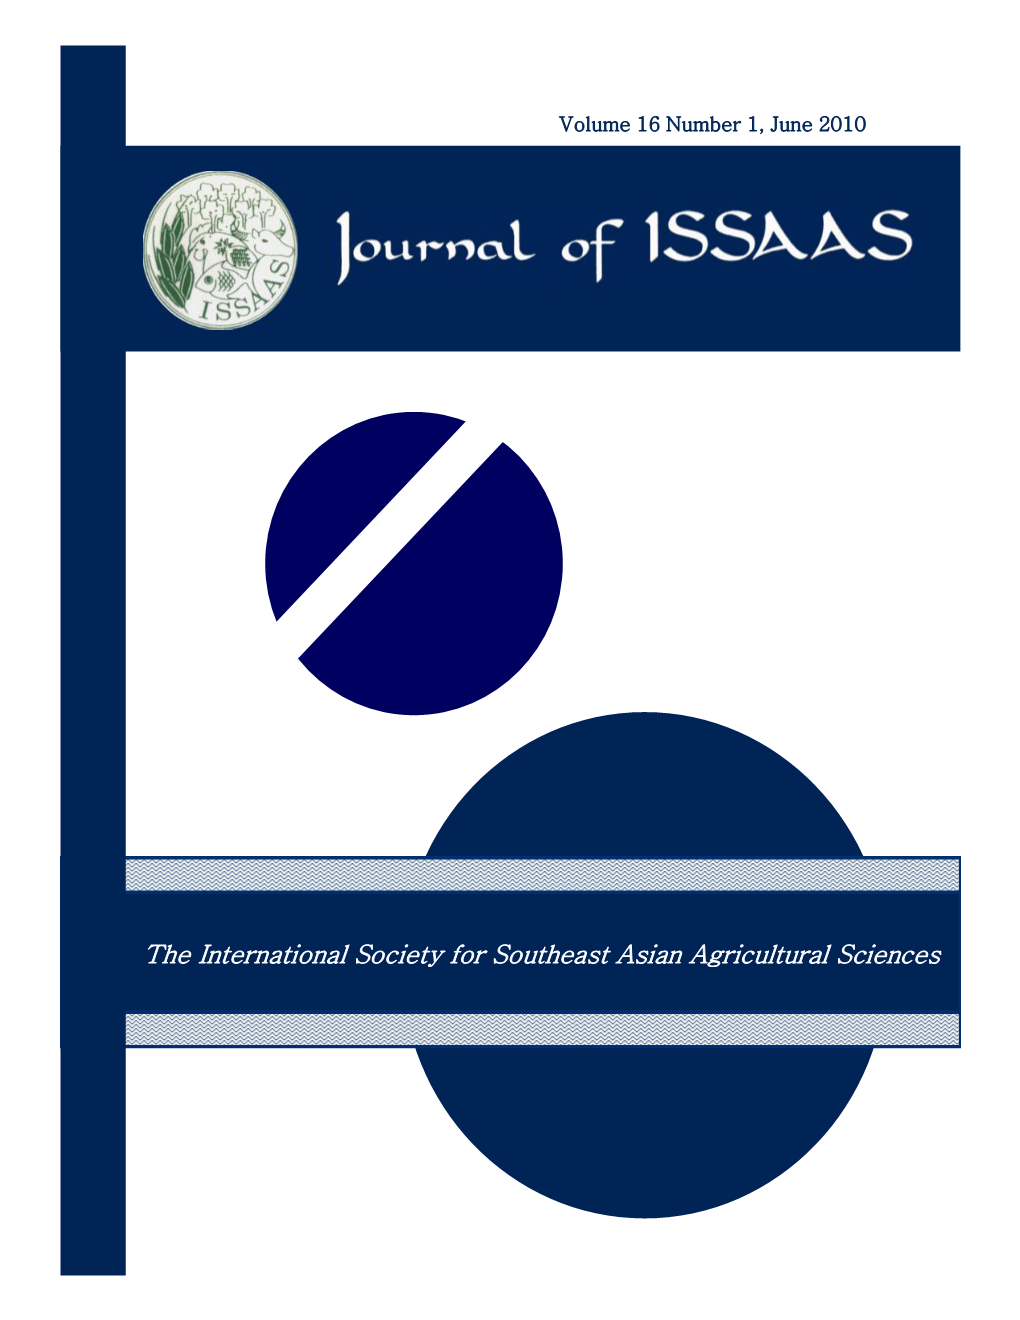 The International Society for Southeast Asian Agricultural Sciences J